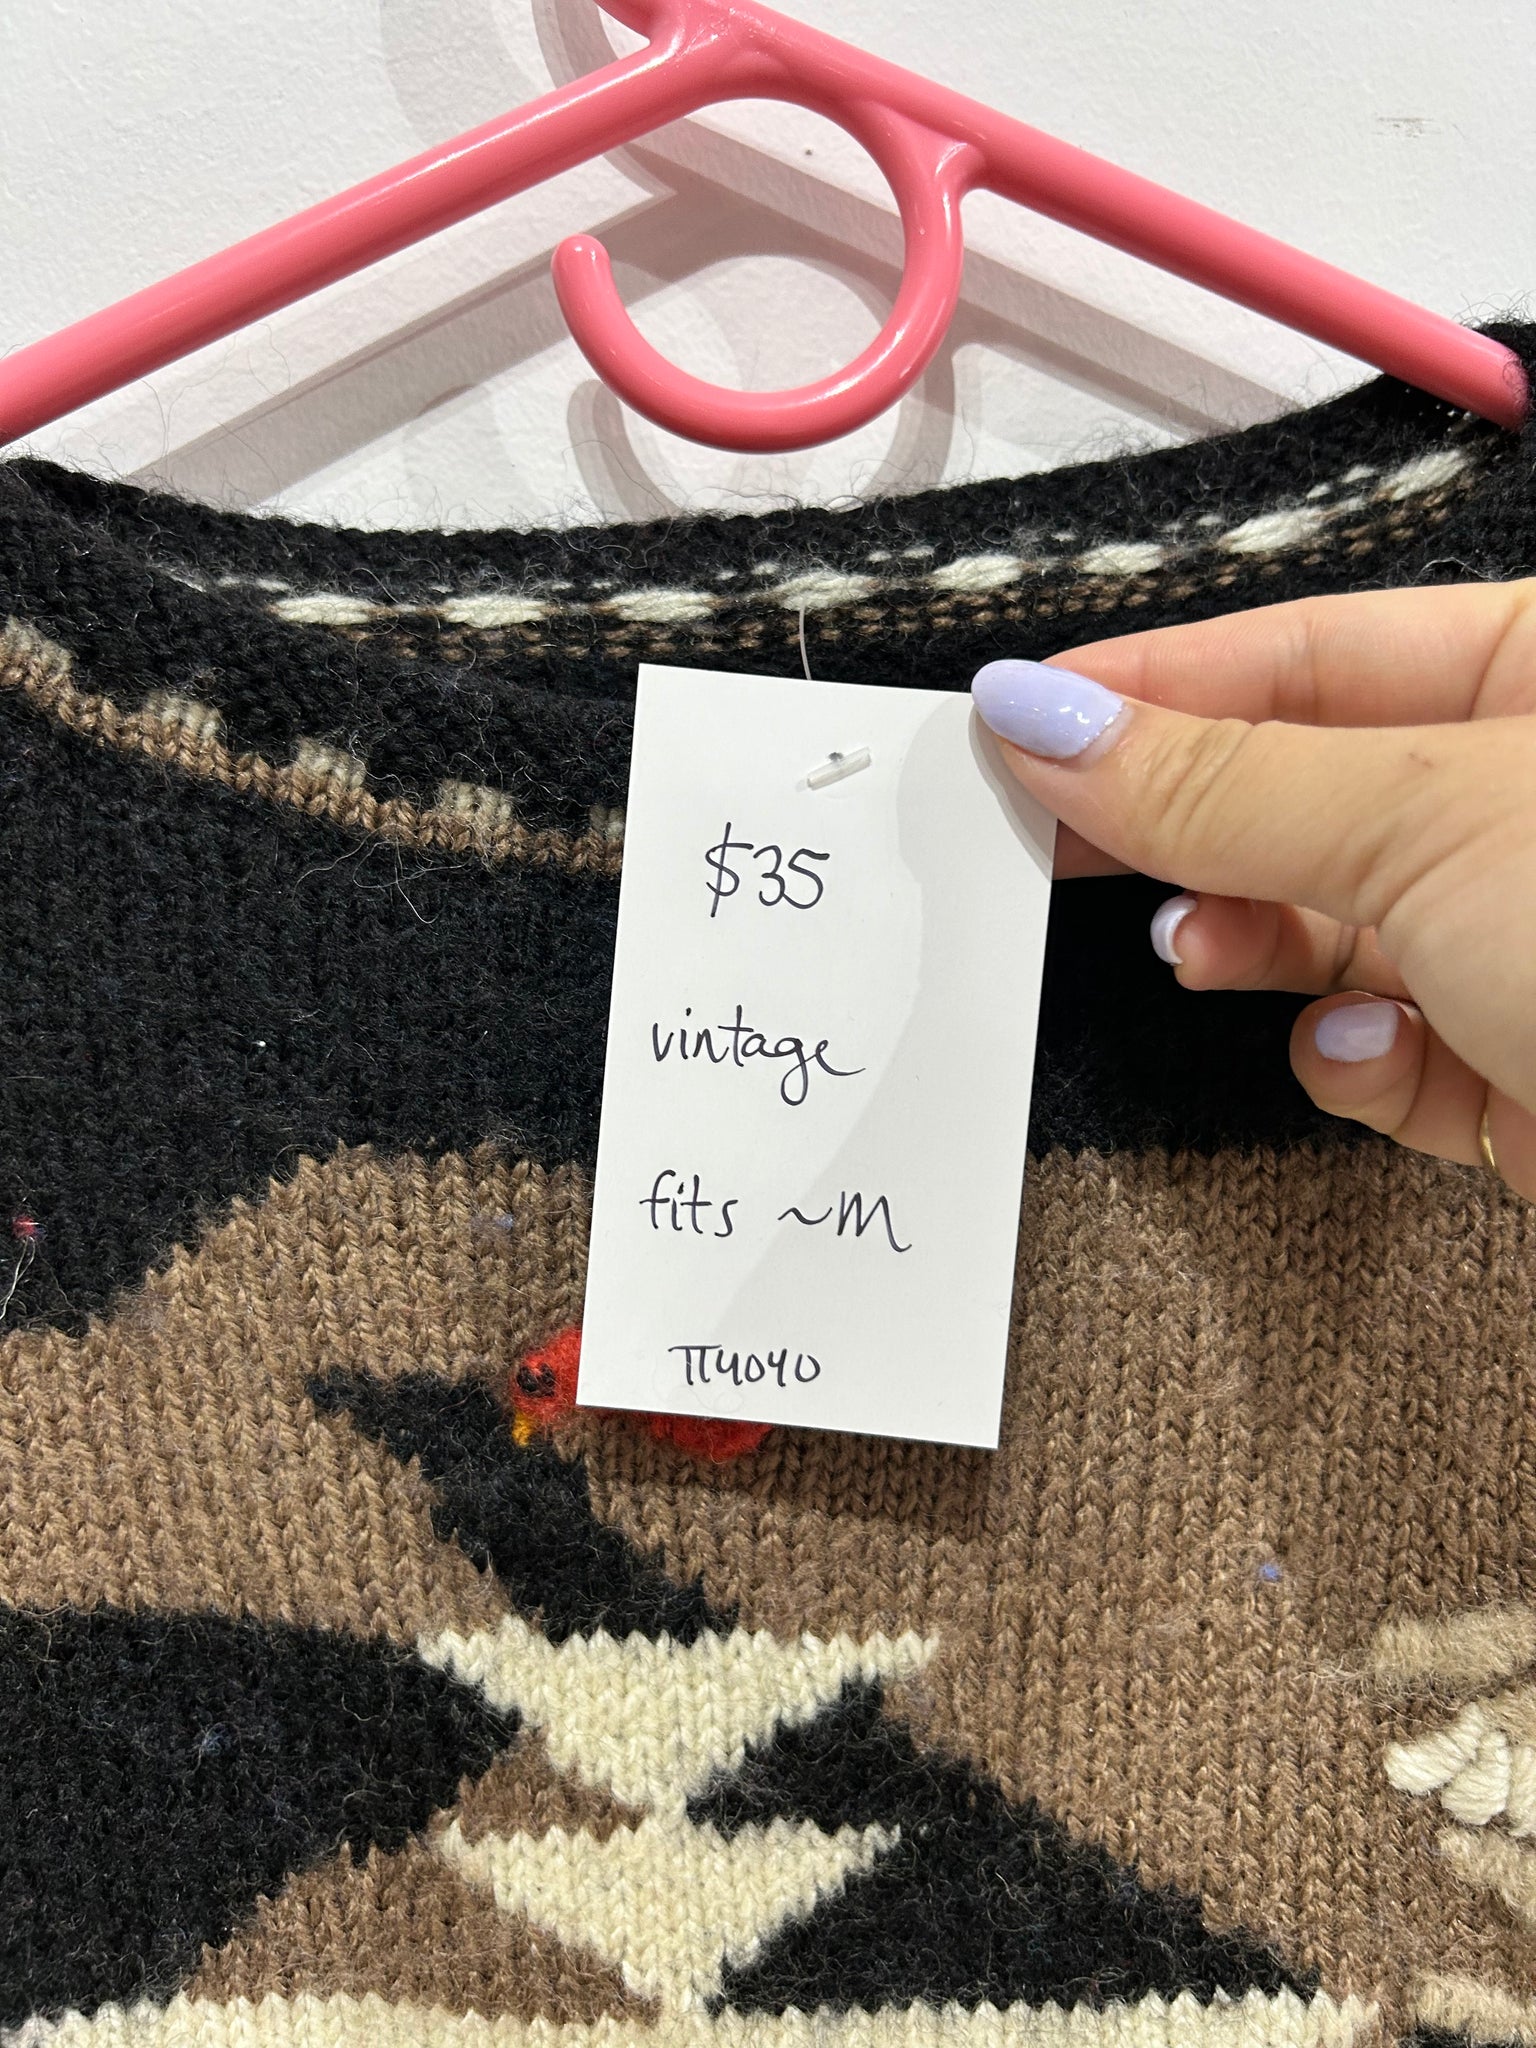 Thrifted vintage & pre-loved knitted sweaters part 3